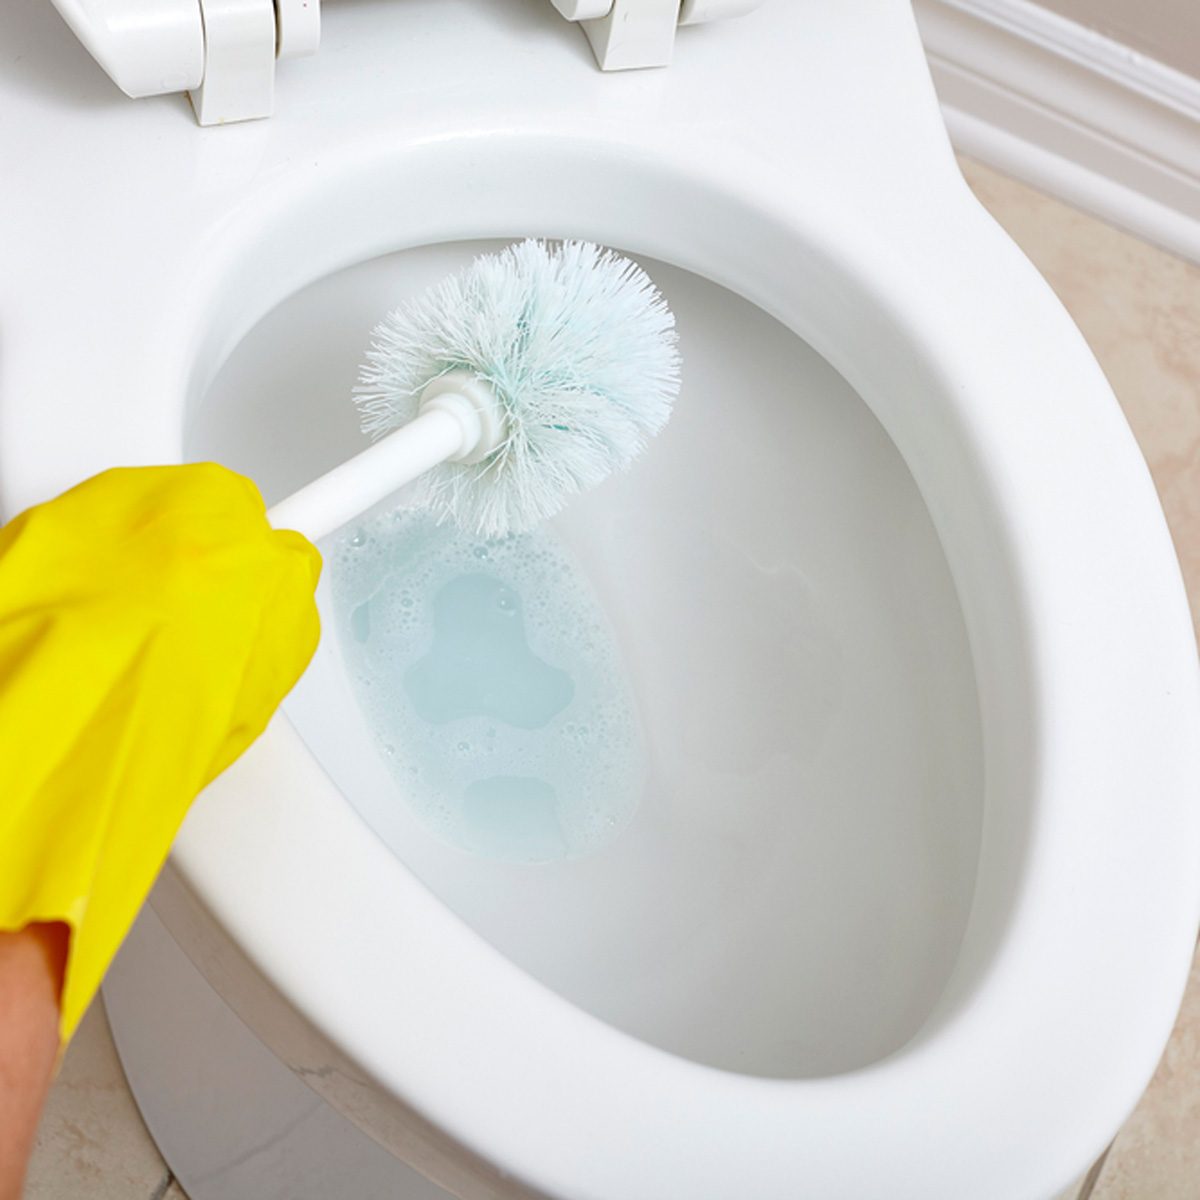 10 Overlooked Tips for Cleaning Your Bathroom